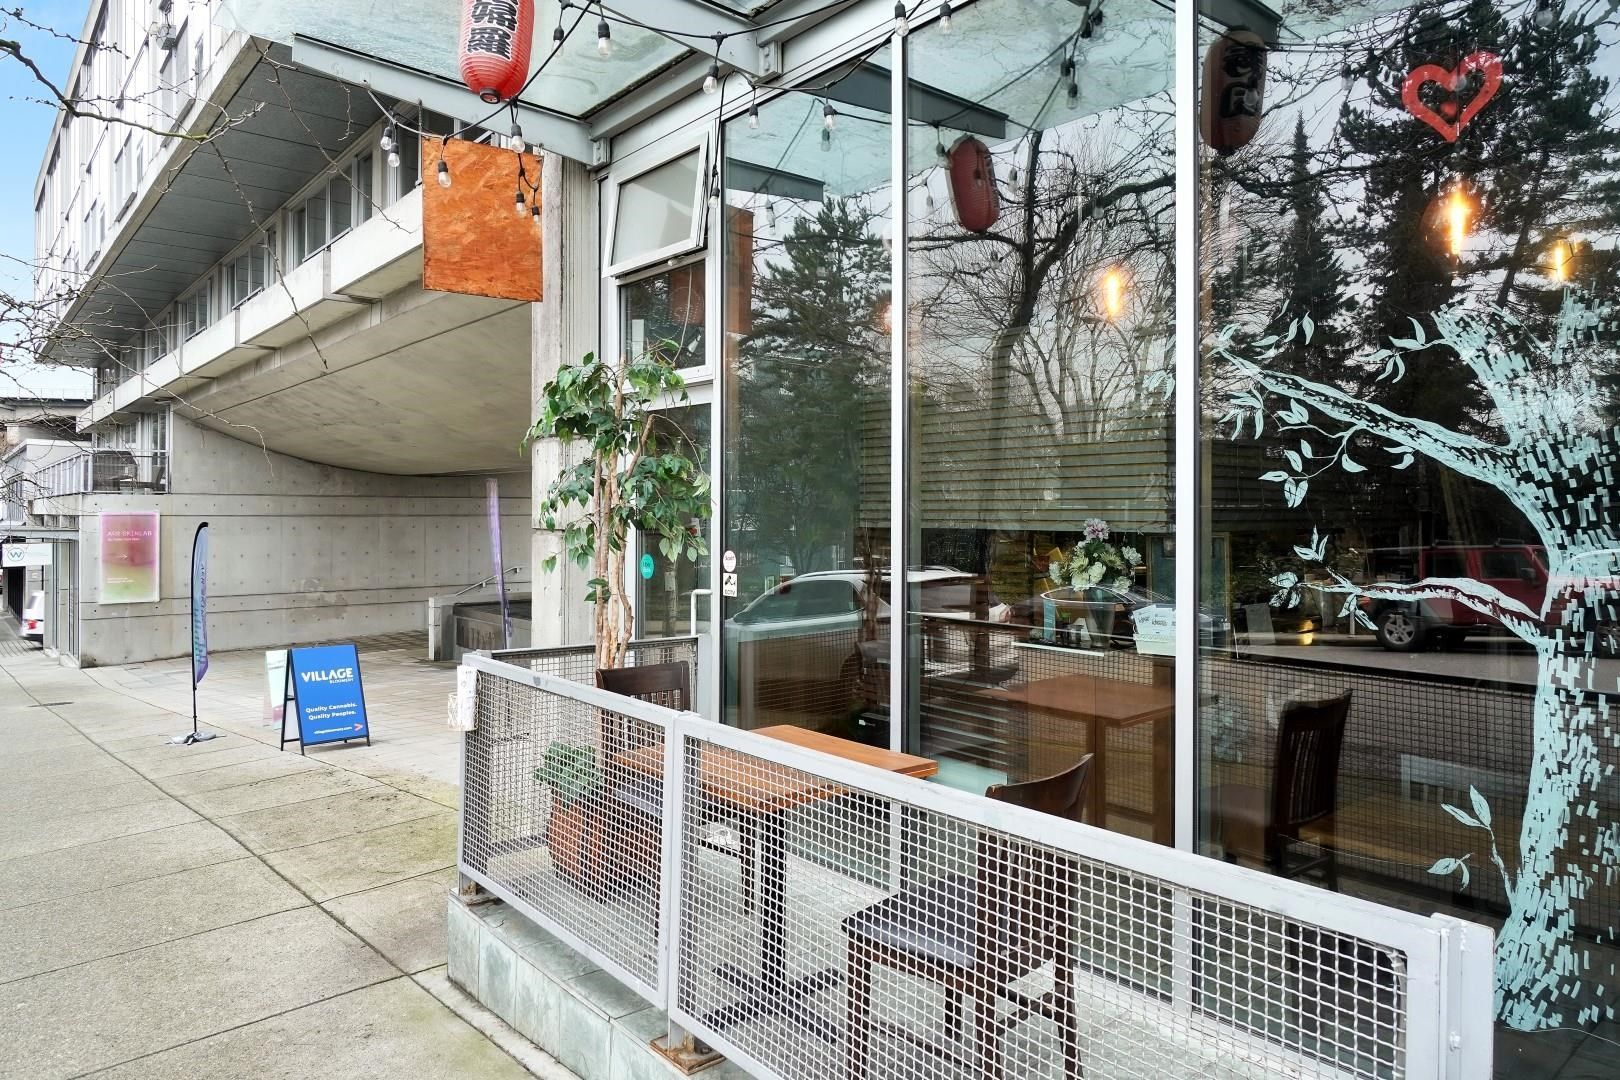 Main Photo: 1542 W 2ND Avenue in Vancouver: False Creek Business for sale (Vancouver West)  : MLS®# C8053902